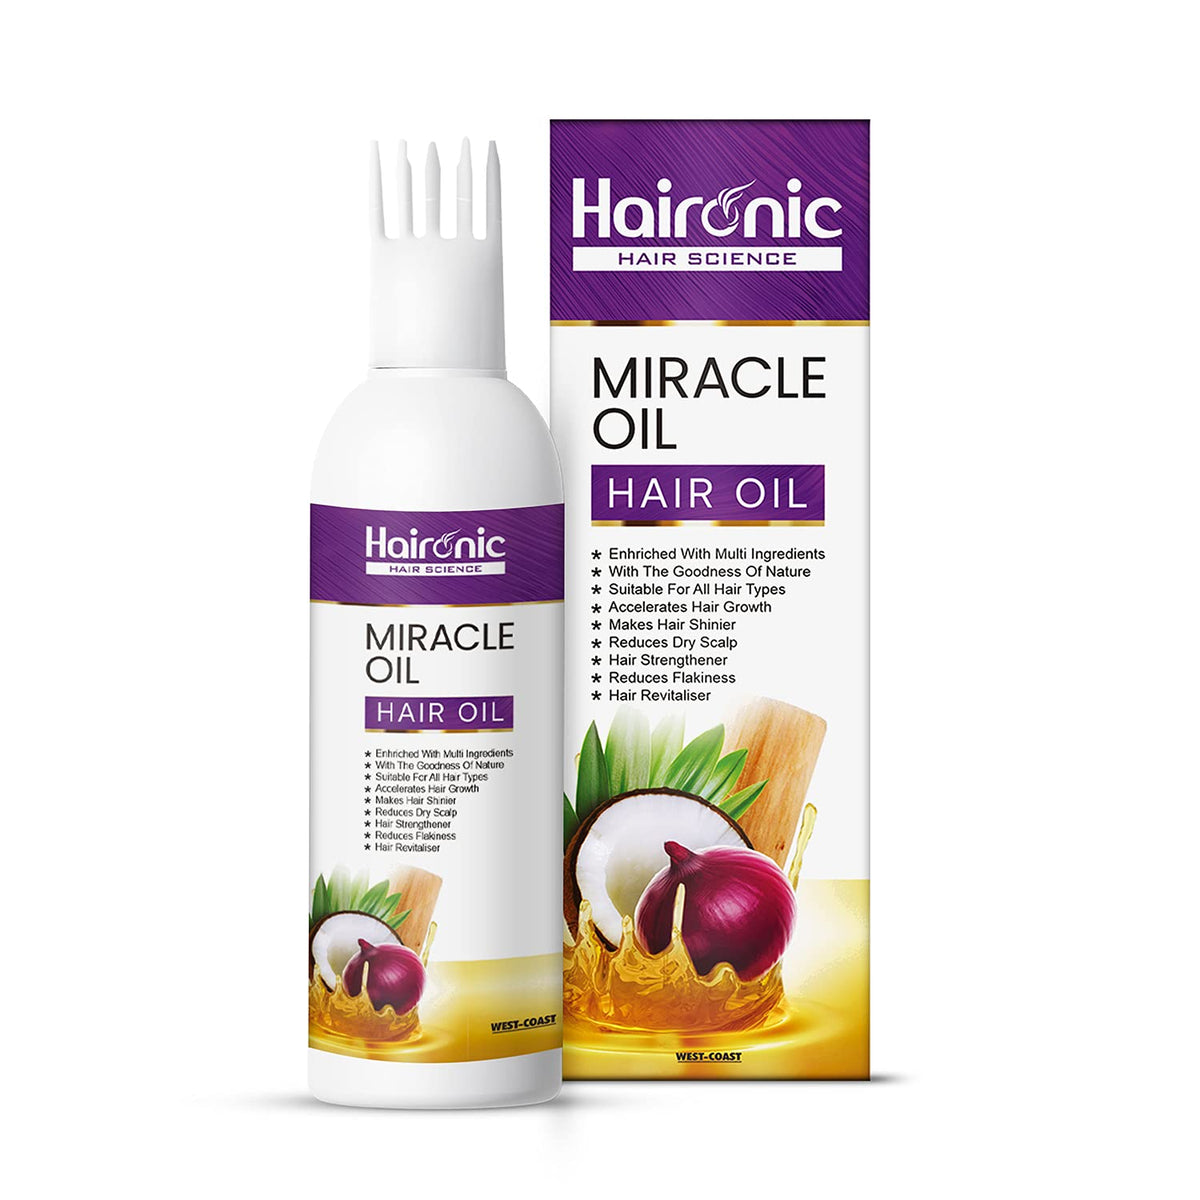 Haironic Hair Science Miracle Hair Oil Enriched With Multi Ingredients for Anti-Hair Fall Control with Organic Onion and Sesame Seeds Oil -100ml (Pack of 2)